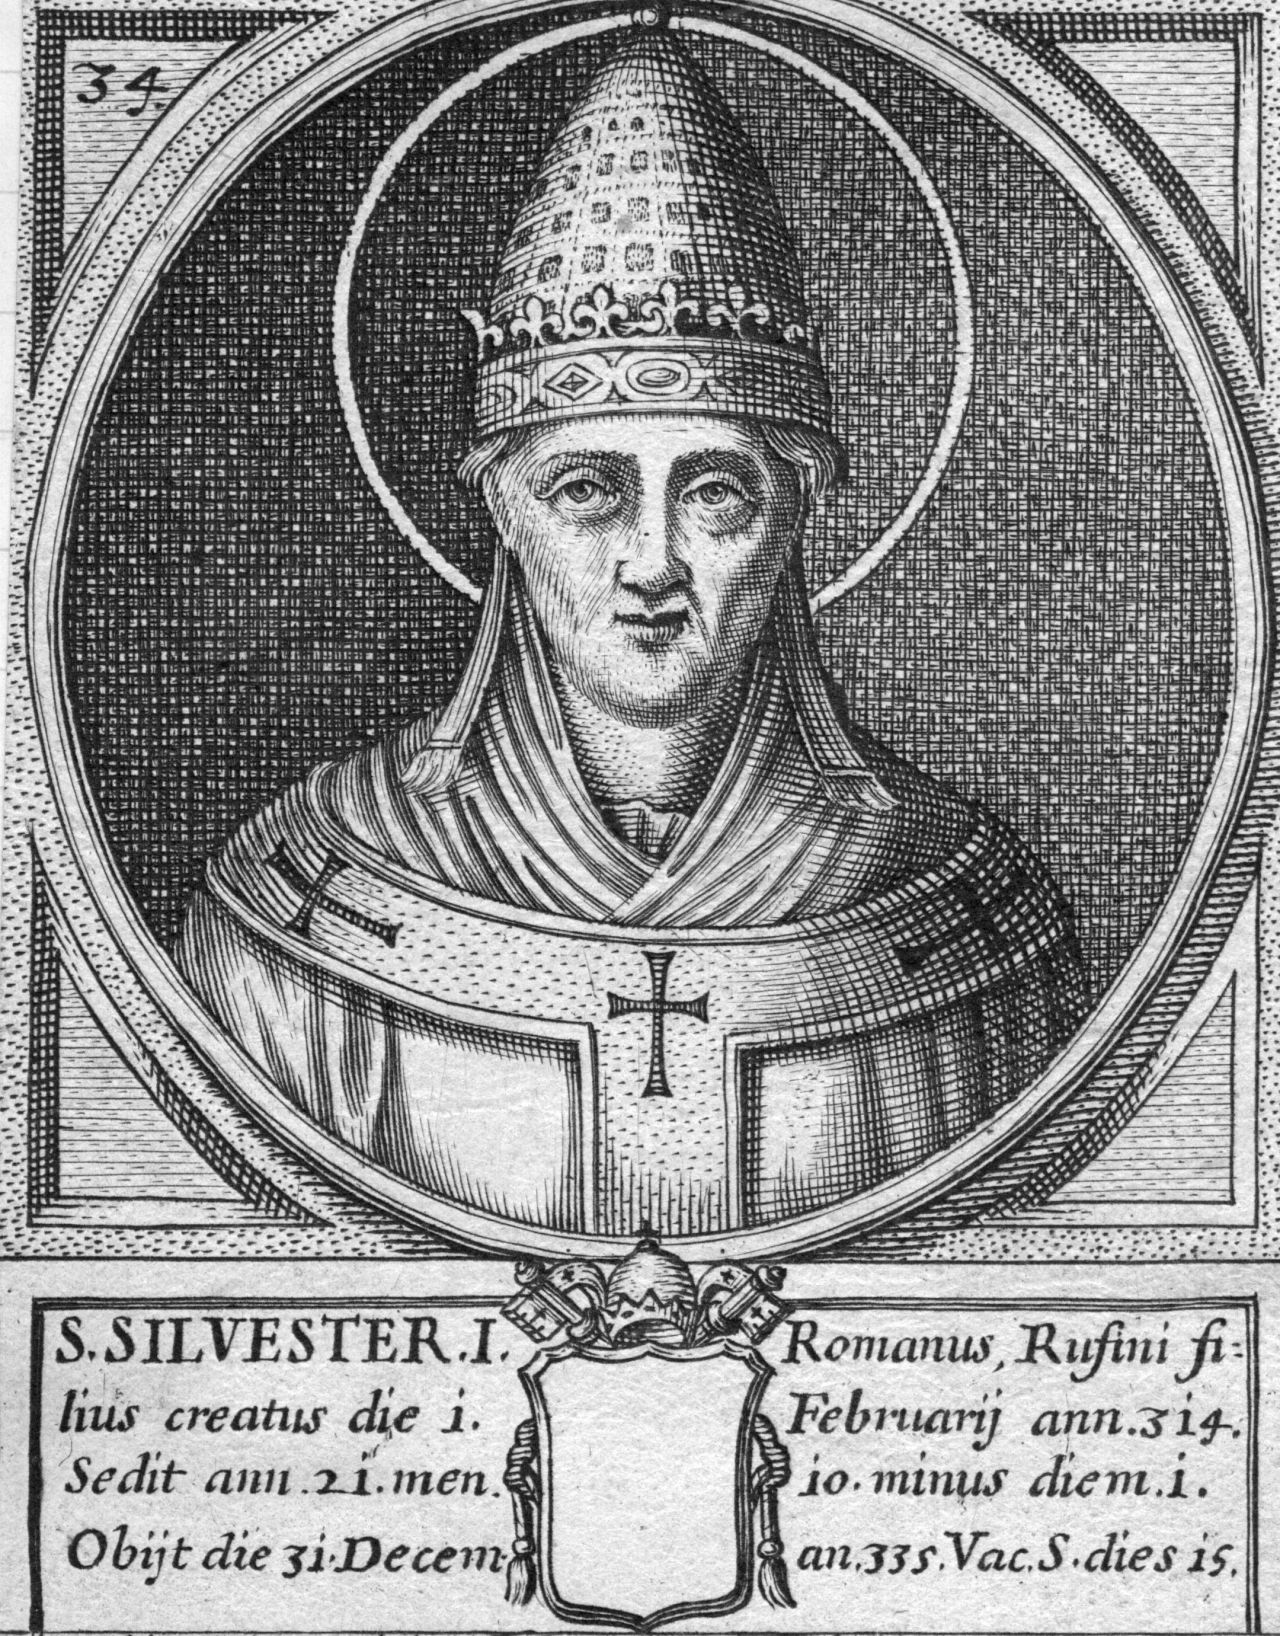 No. 8:  Pope Sylvester I reigned from 314 to 335 for a total of 21 years, 11 months and 1 day.